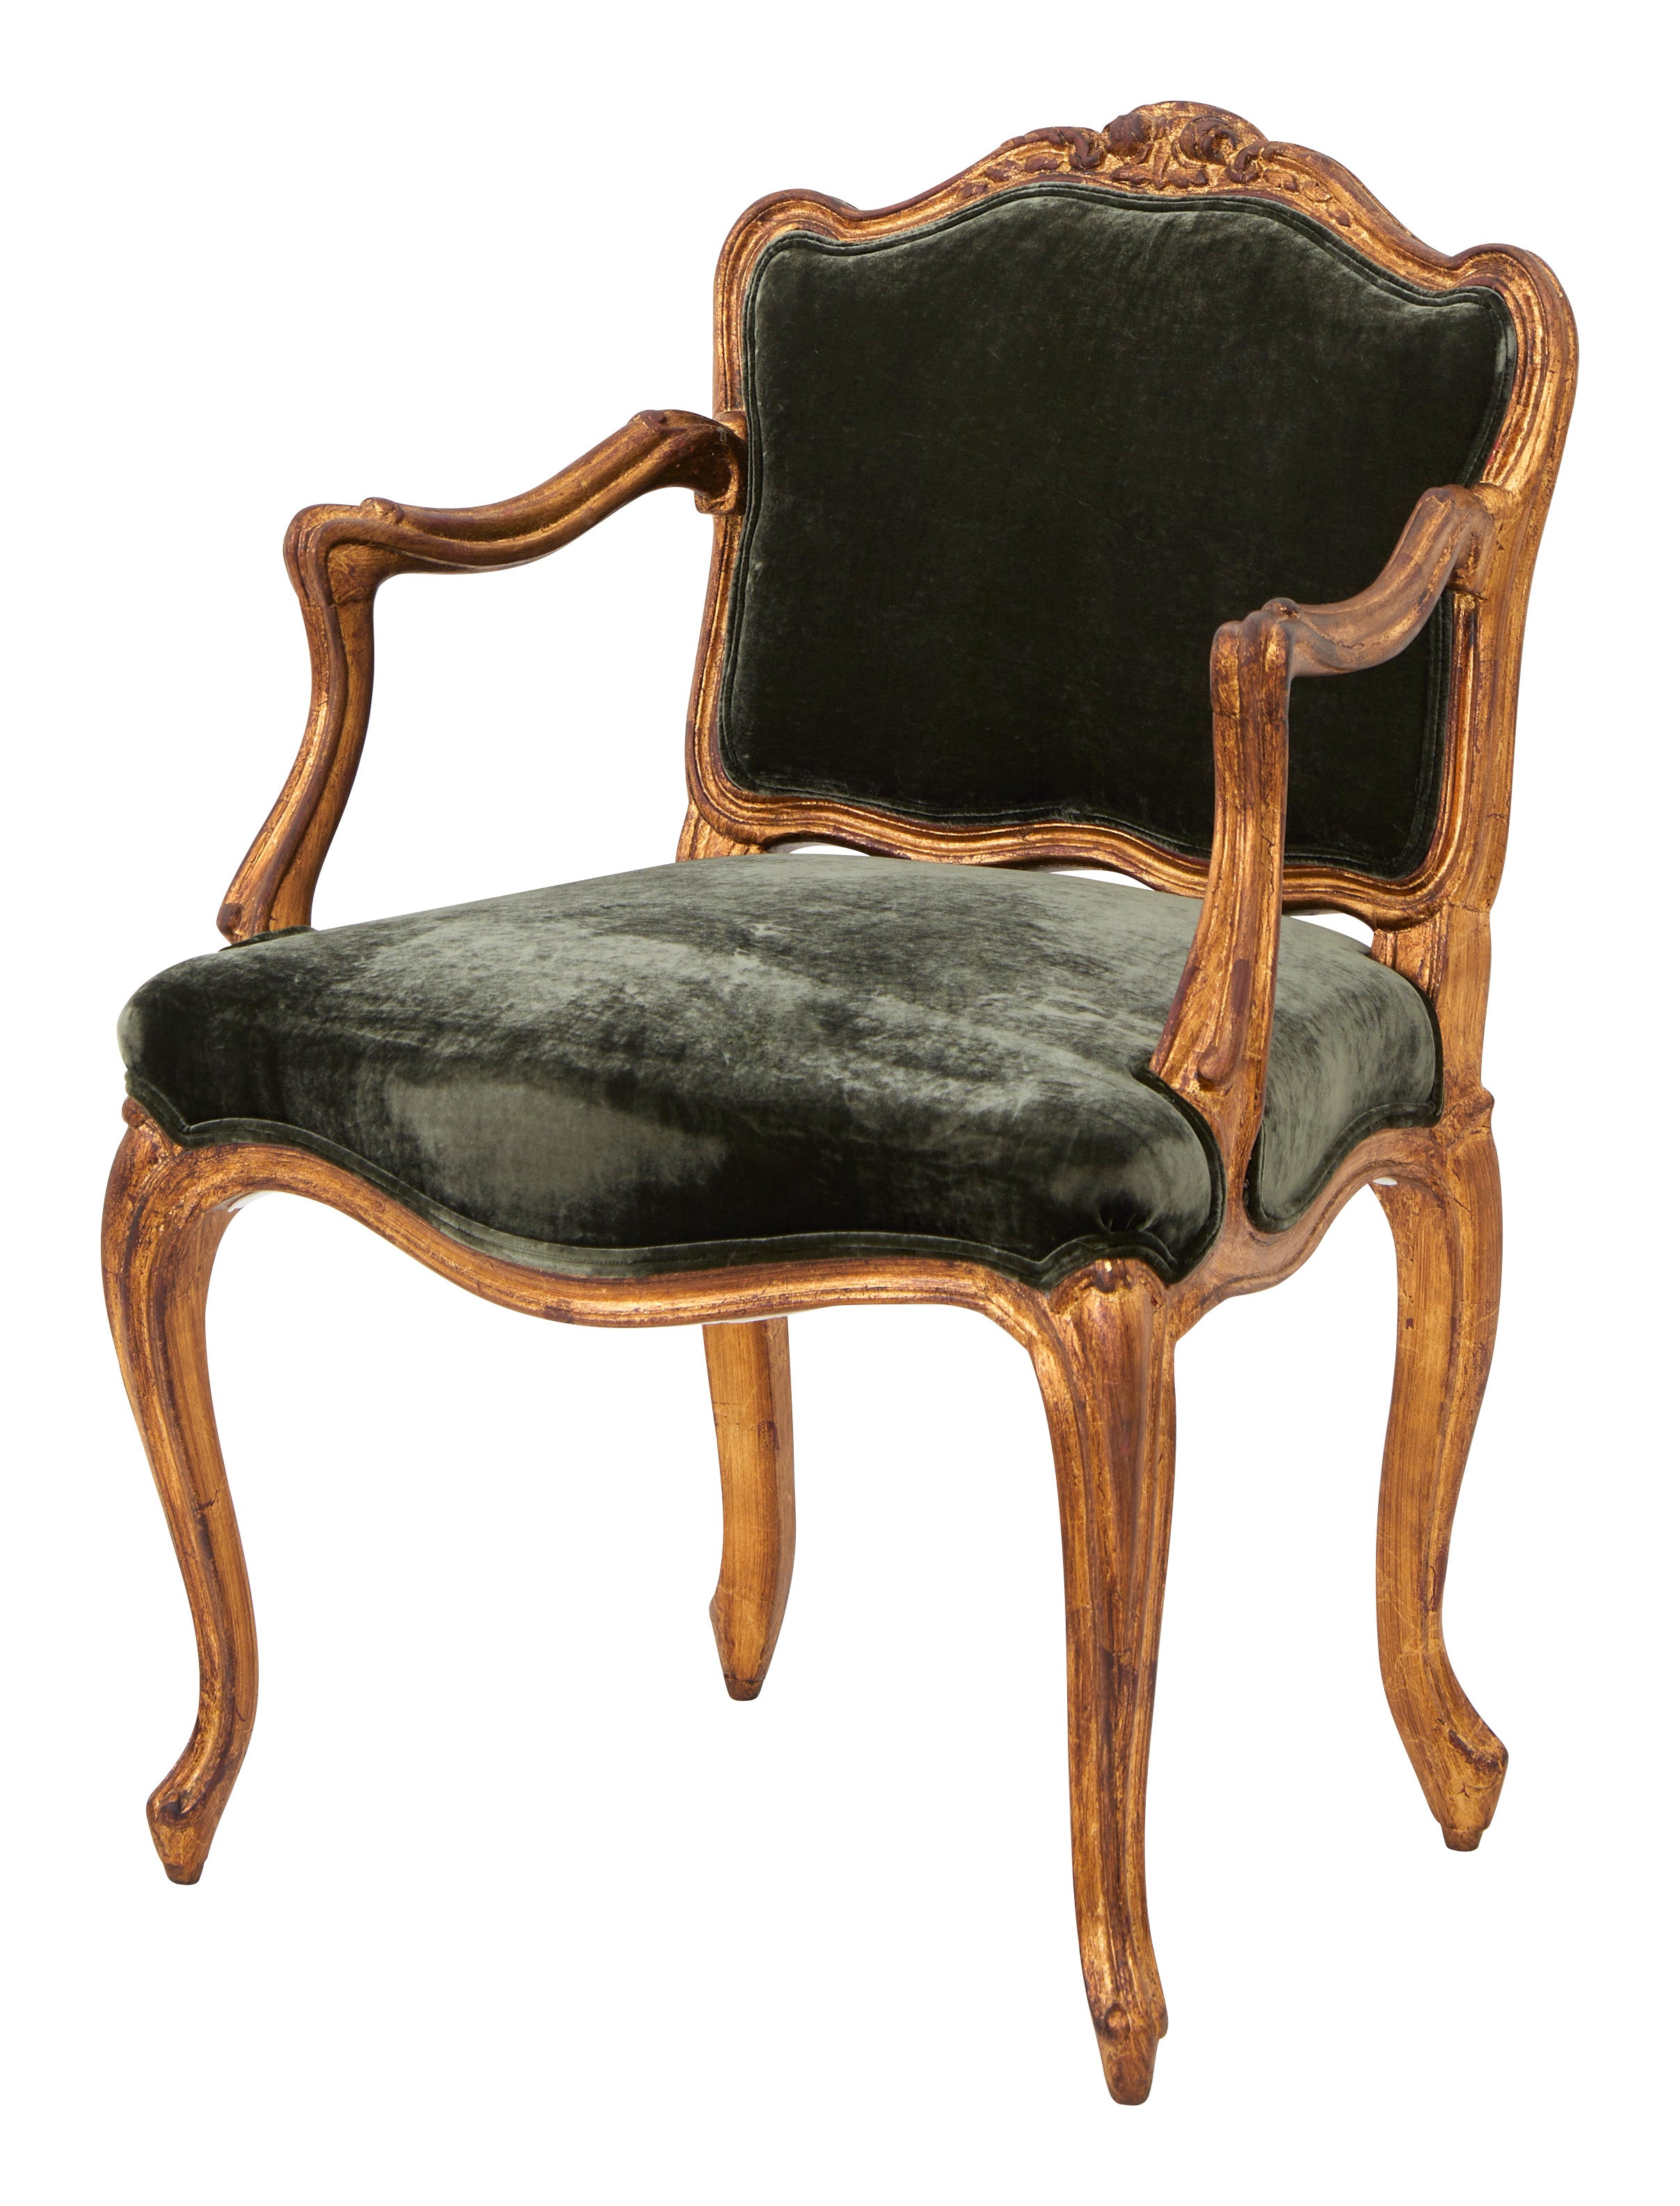 Baudelaire Chair & Jayson Home